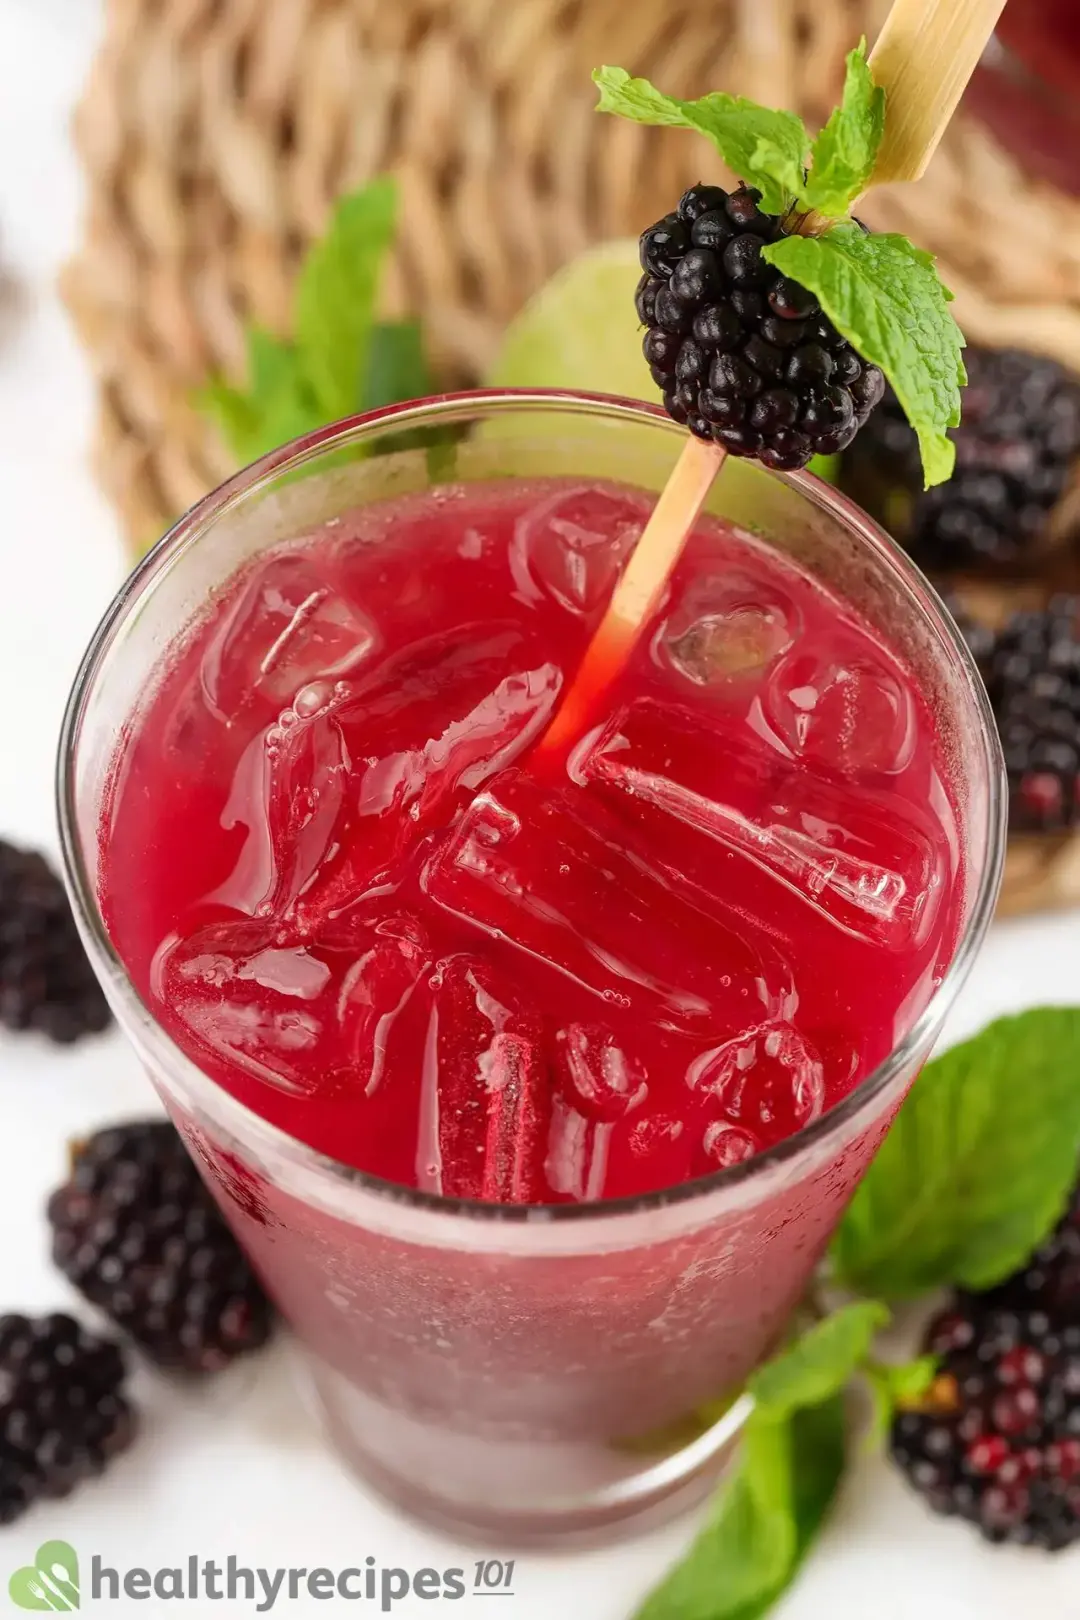 A close-up shot of a glass of red-pink blackberry drink, garnished with mints and blackberries lying around